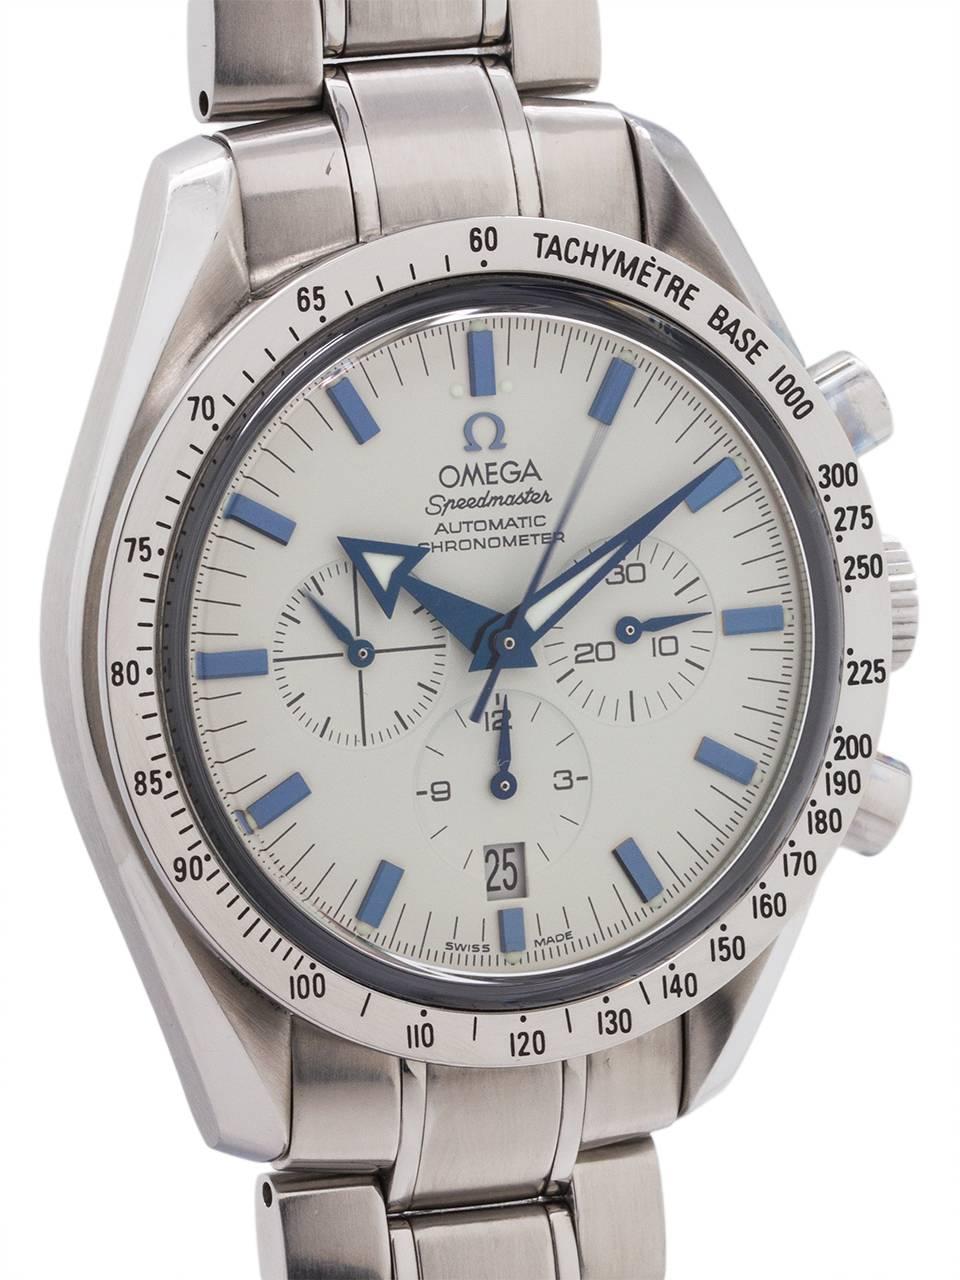 Omega Stainless Steel Speedmaster “Broadarrow” case ref# 3551 20 irca 2000’s. This is the automatic version of the classic original Speedmaster models. Featuring 42 x 47mm case with screw down back and wide polished finish tachymetre bezel. Original